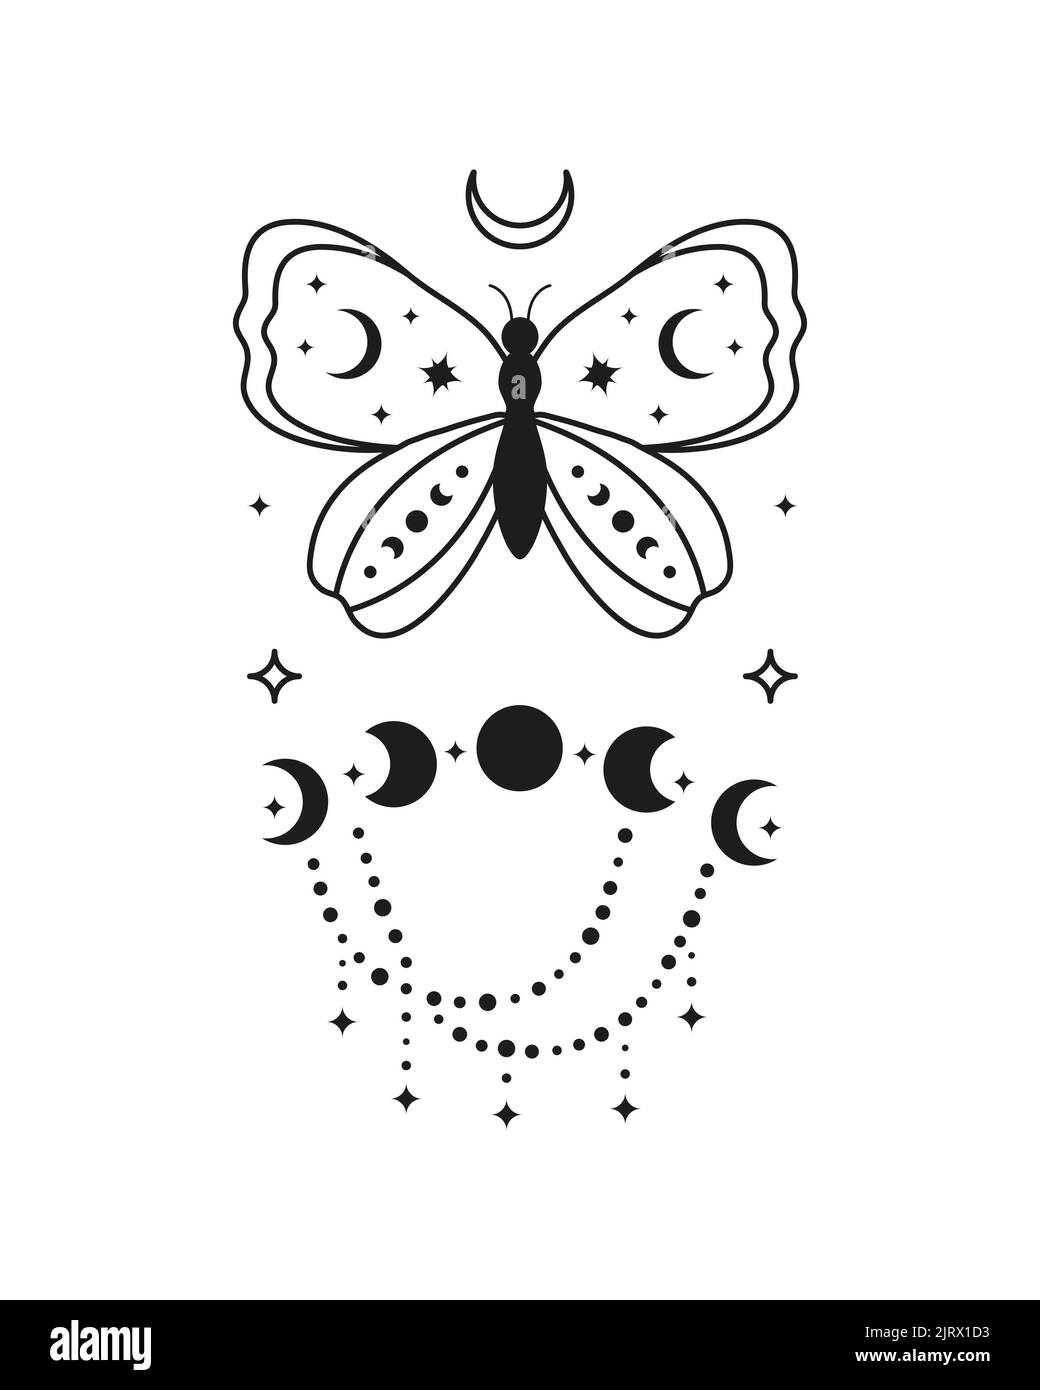 Magic occult tarot card with boho symbols butterfly, moon phases, beads, crescent and stars isolated on white background. Astrology spiritual poster. Stock Vector